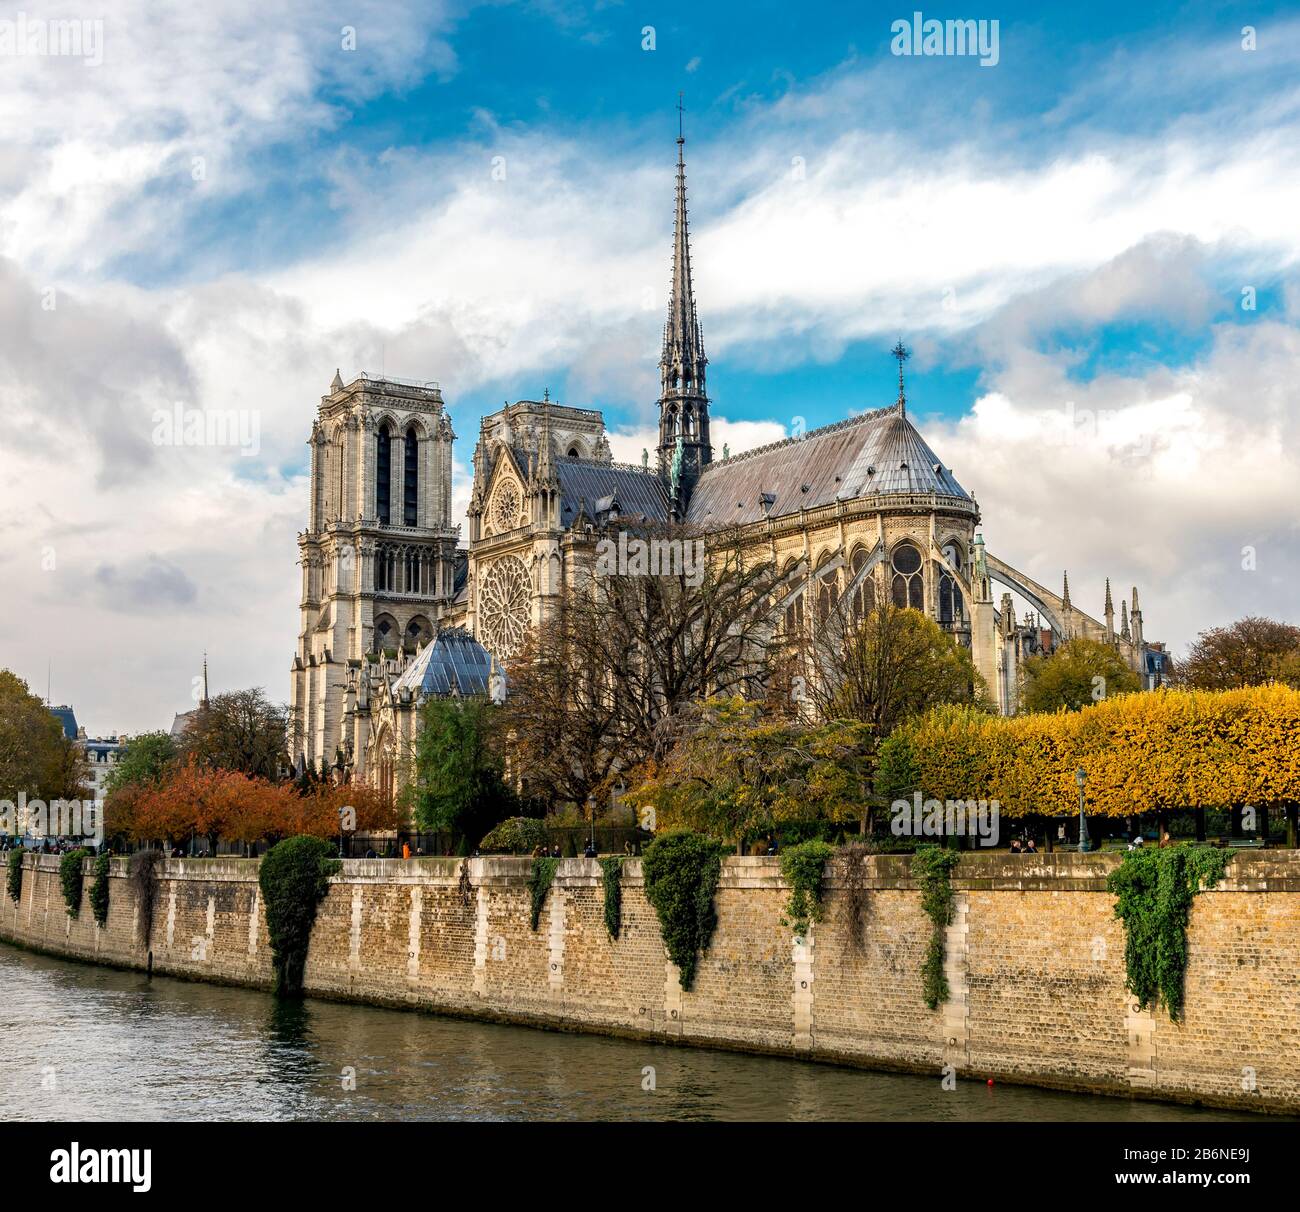 Beautiful Notre-Dame de Paris cathedral with a Gothic spire several month before the fire in colorful autumn season, Paris, France Stock Photo